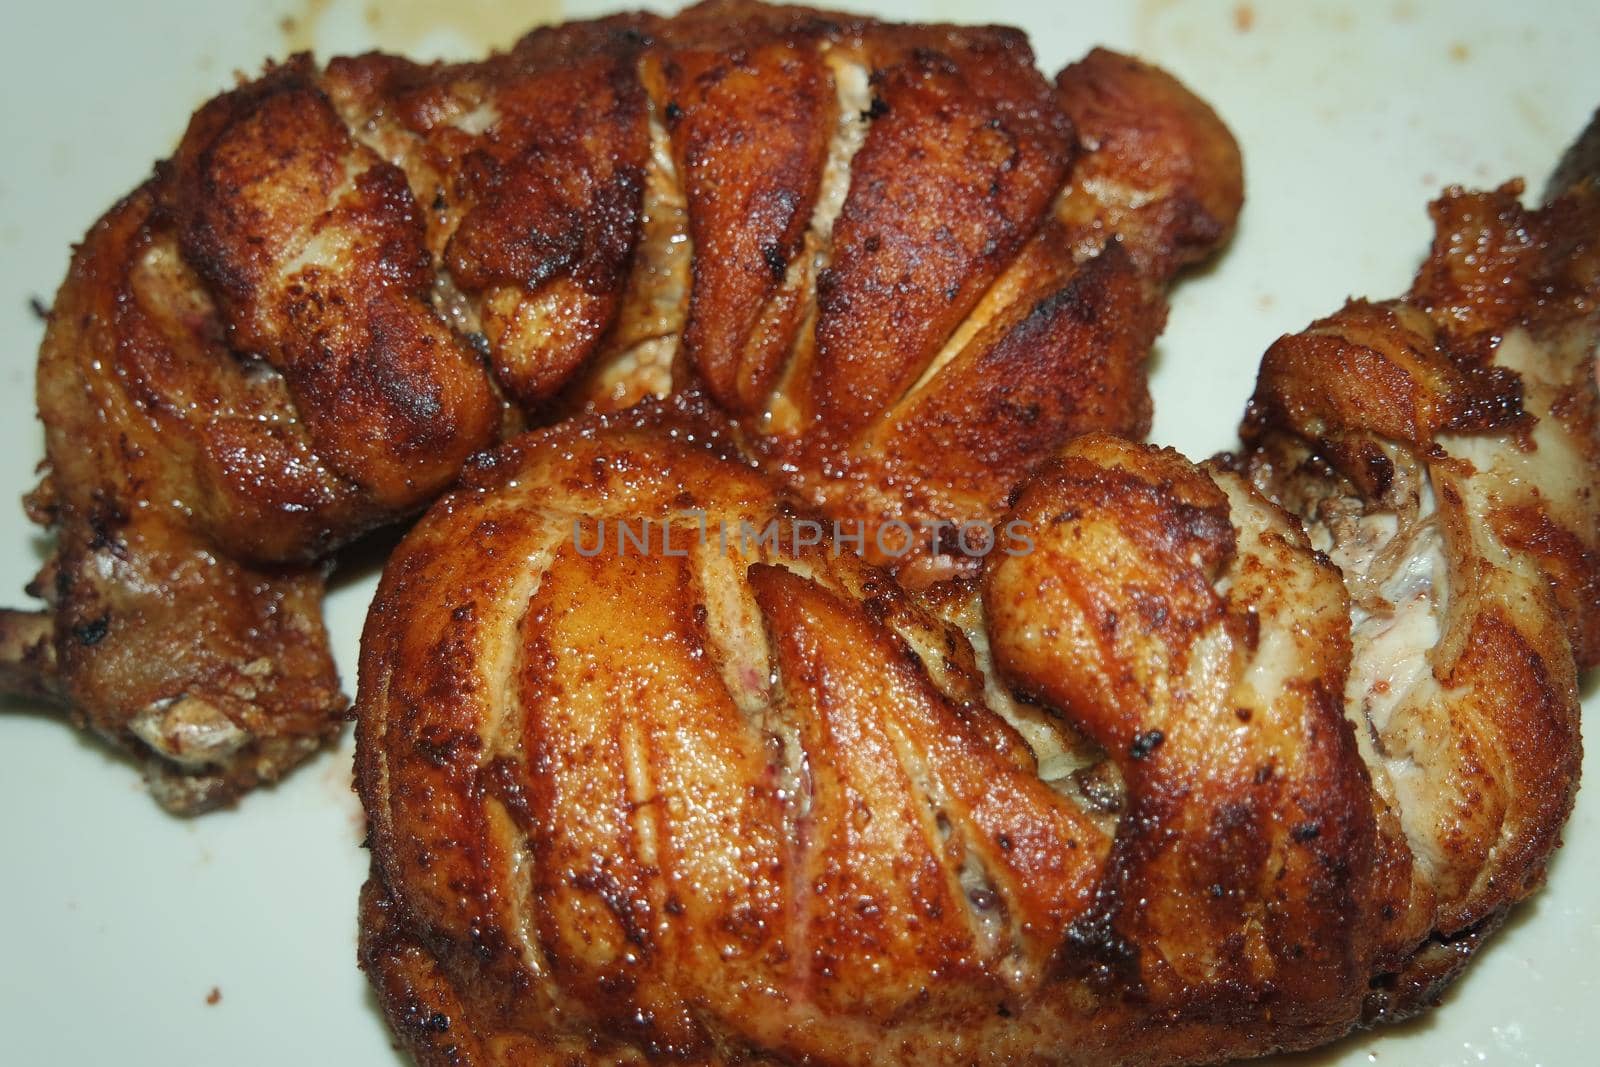 Fried, grilled baked chicken pieces with marinated spices on it by Photochowk